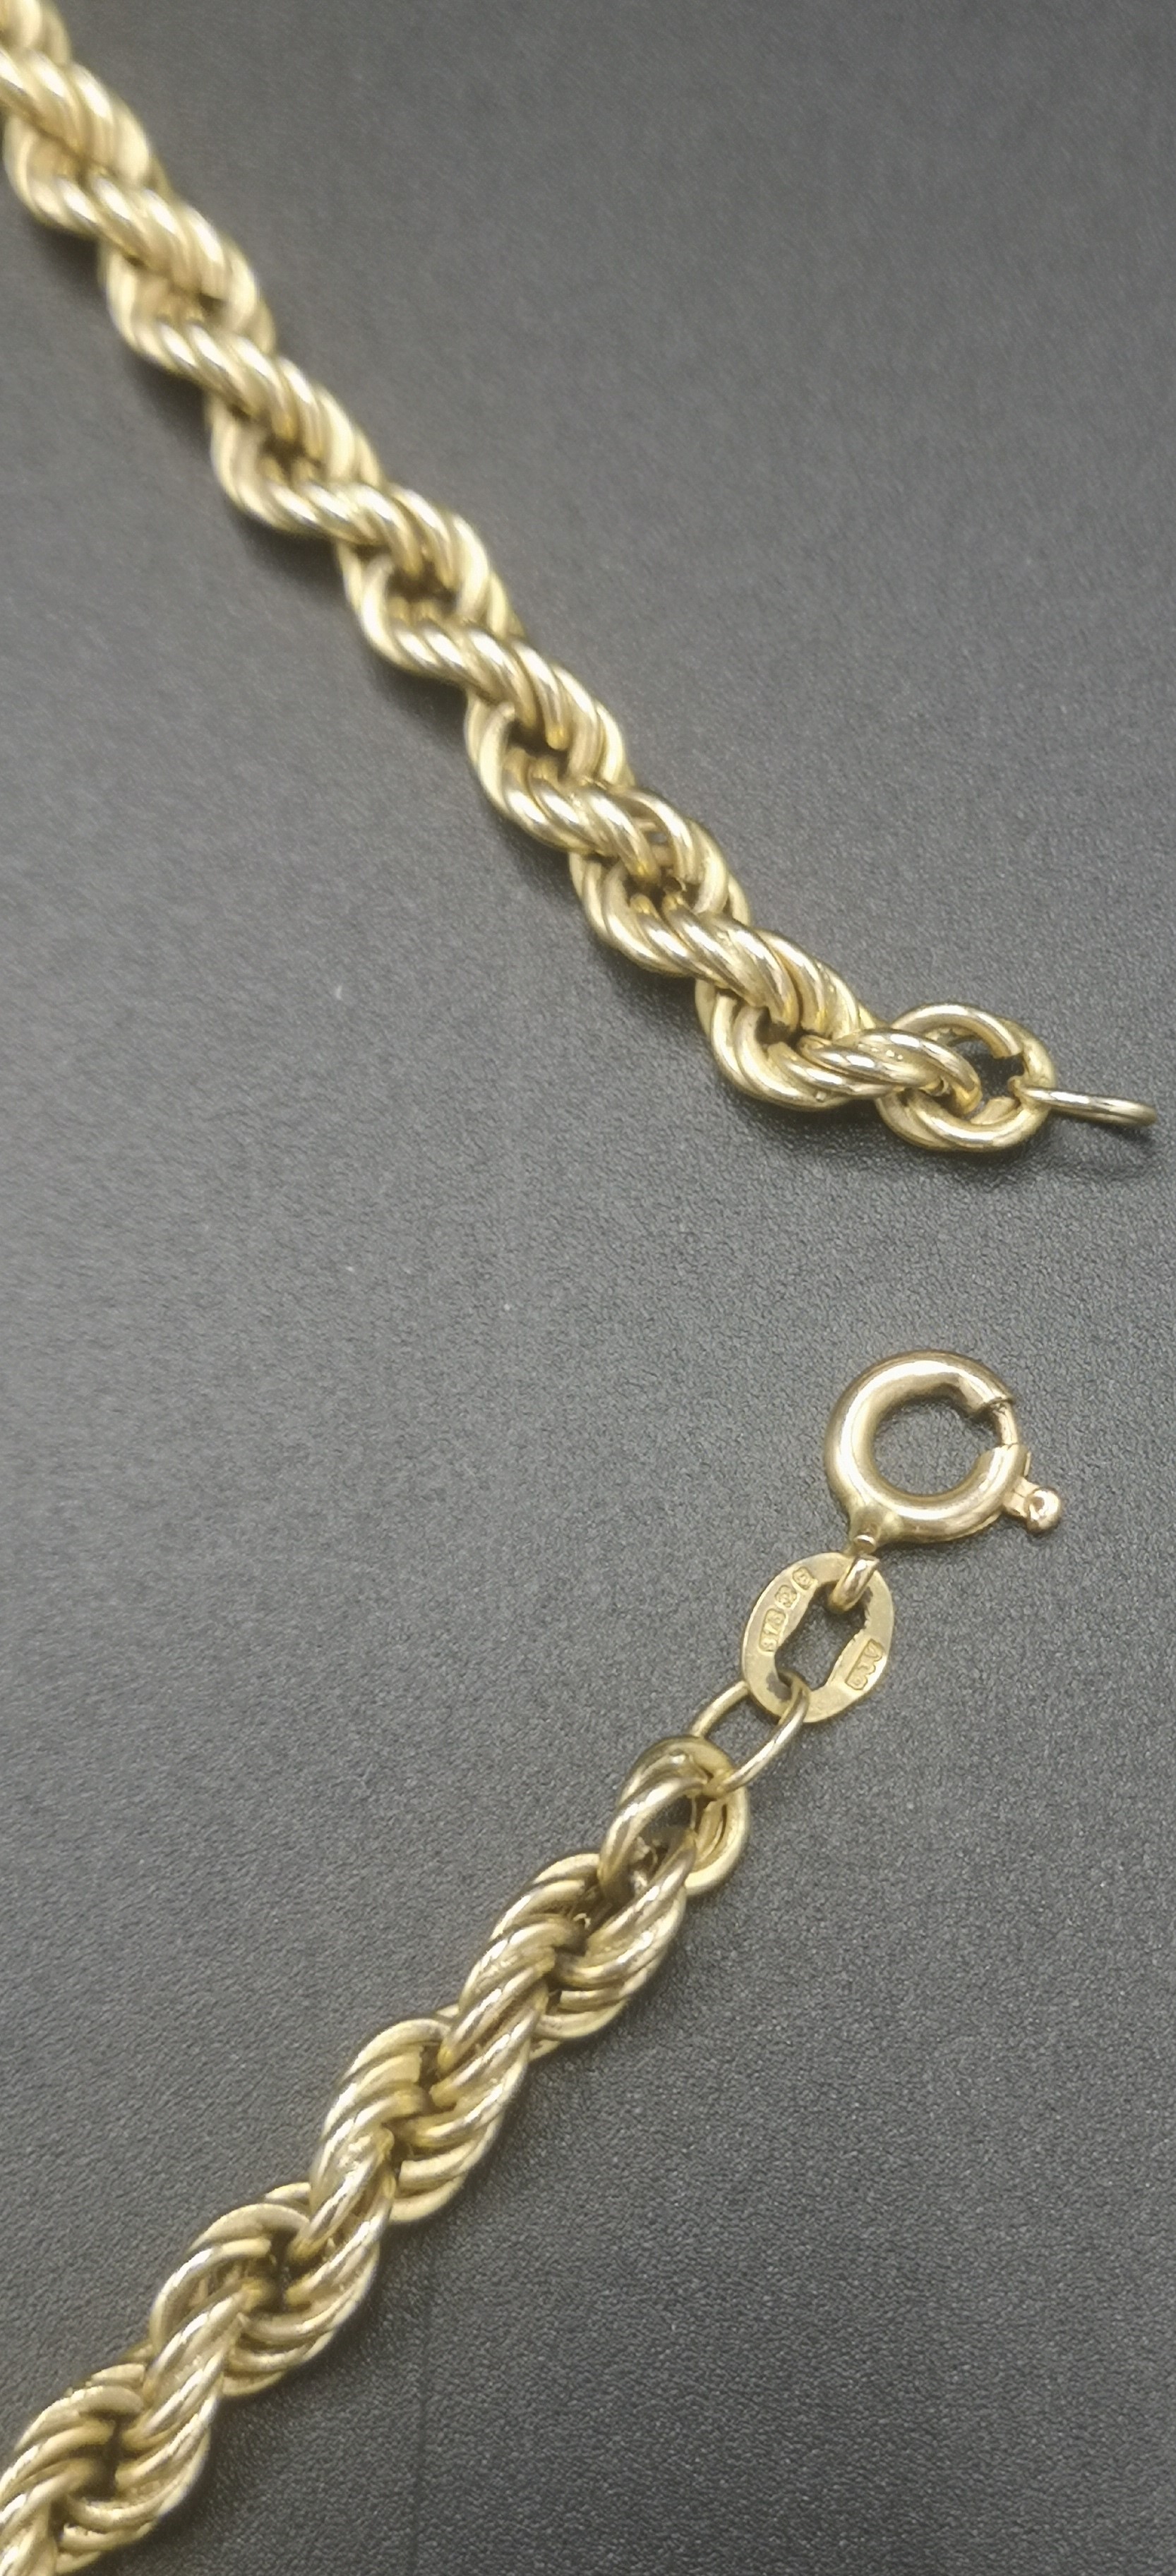 9ct gold rope twist chain - Image 2 of 4